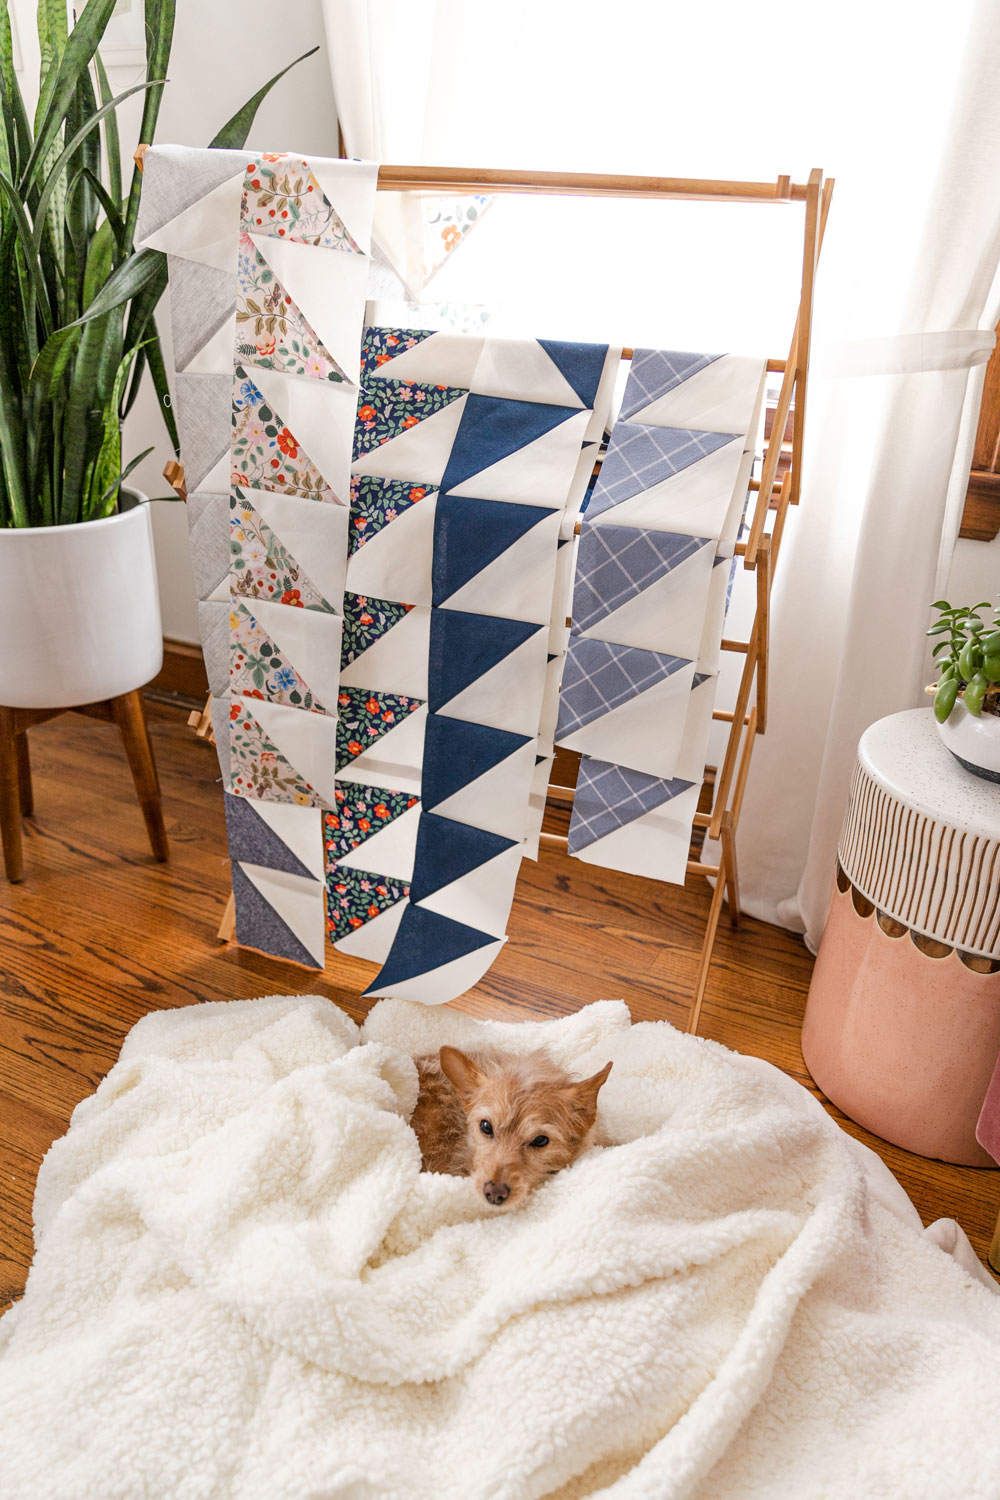 The Gather quilt sew along is an online quilting community experience! We will make this modern quilt pattern together – one week at a time. suzyquilts.com #quiltalong #modernquilt